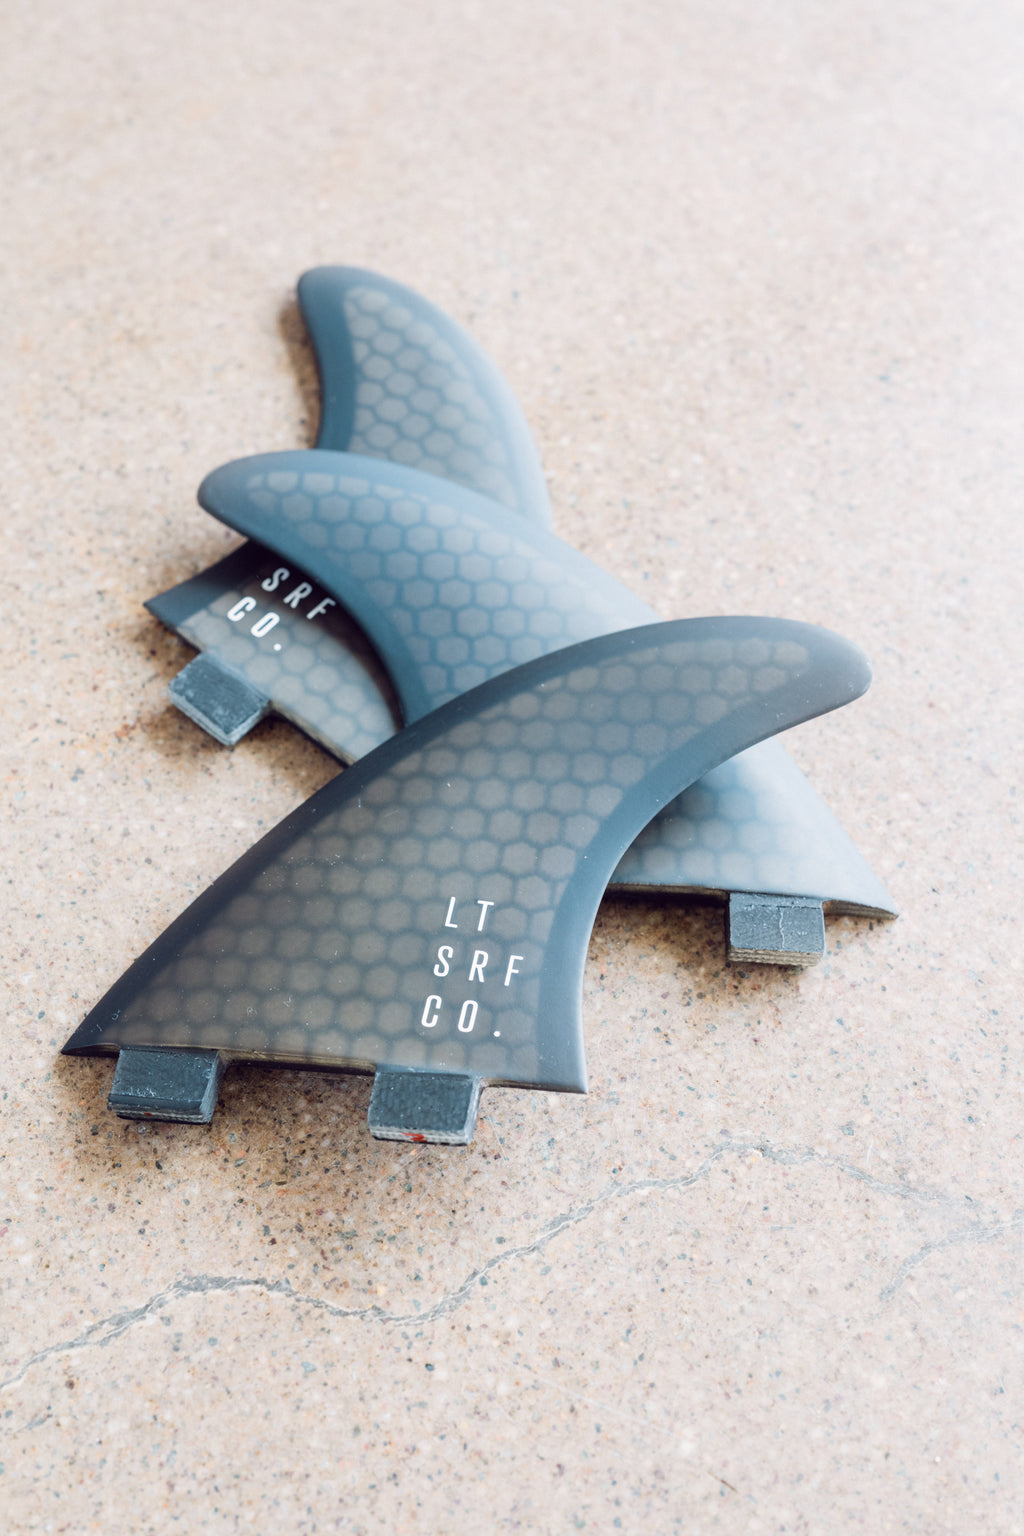 Lawrencetown Surf Co. Thruster Fin Set - FCS